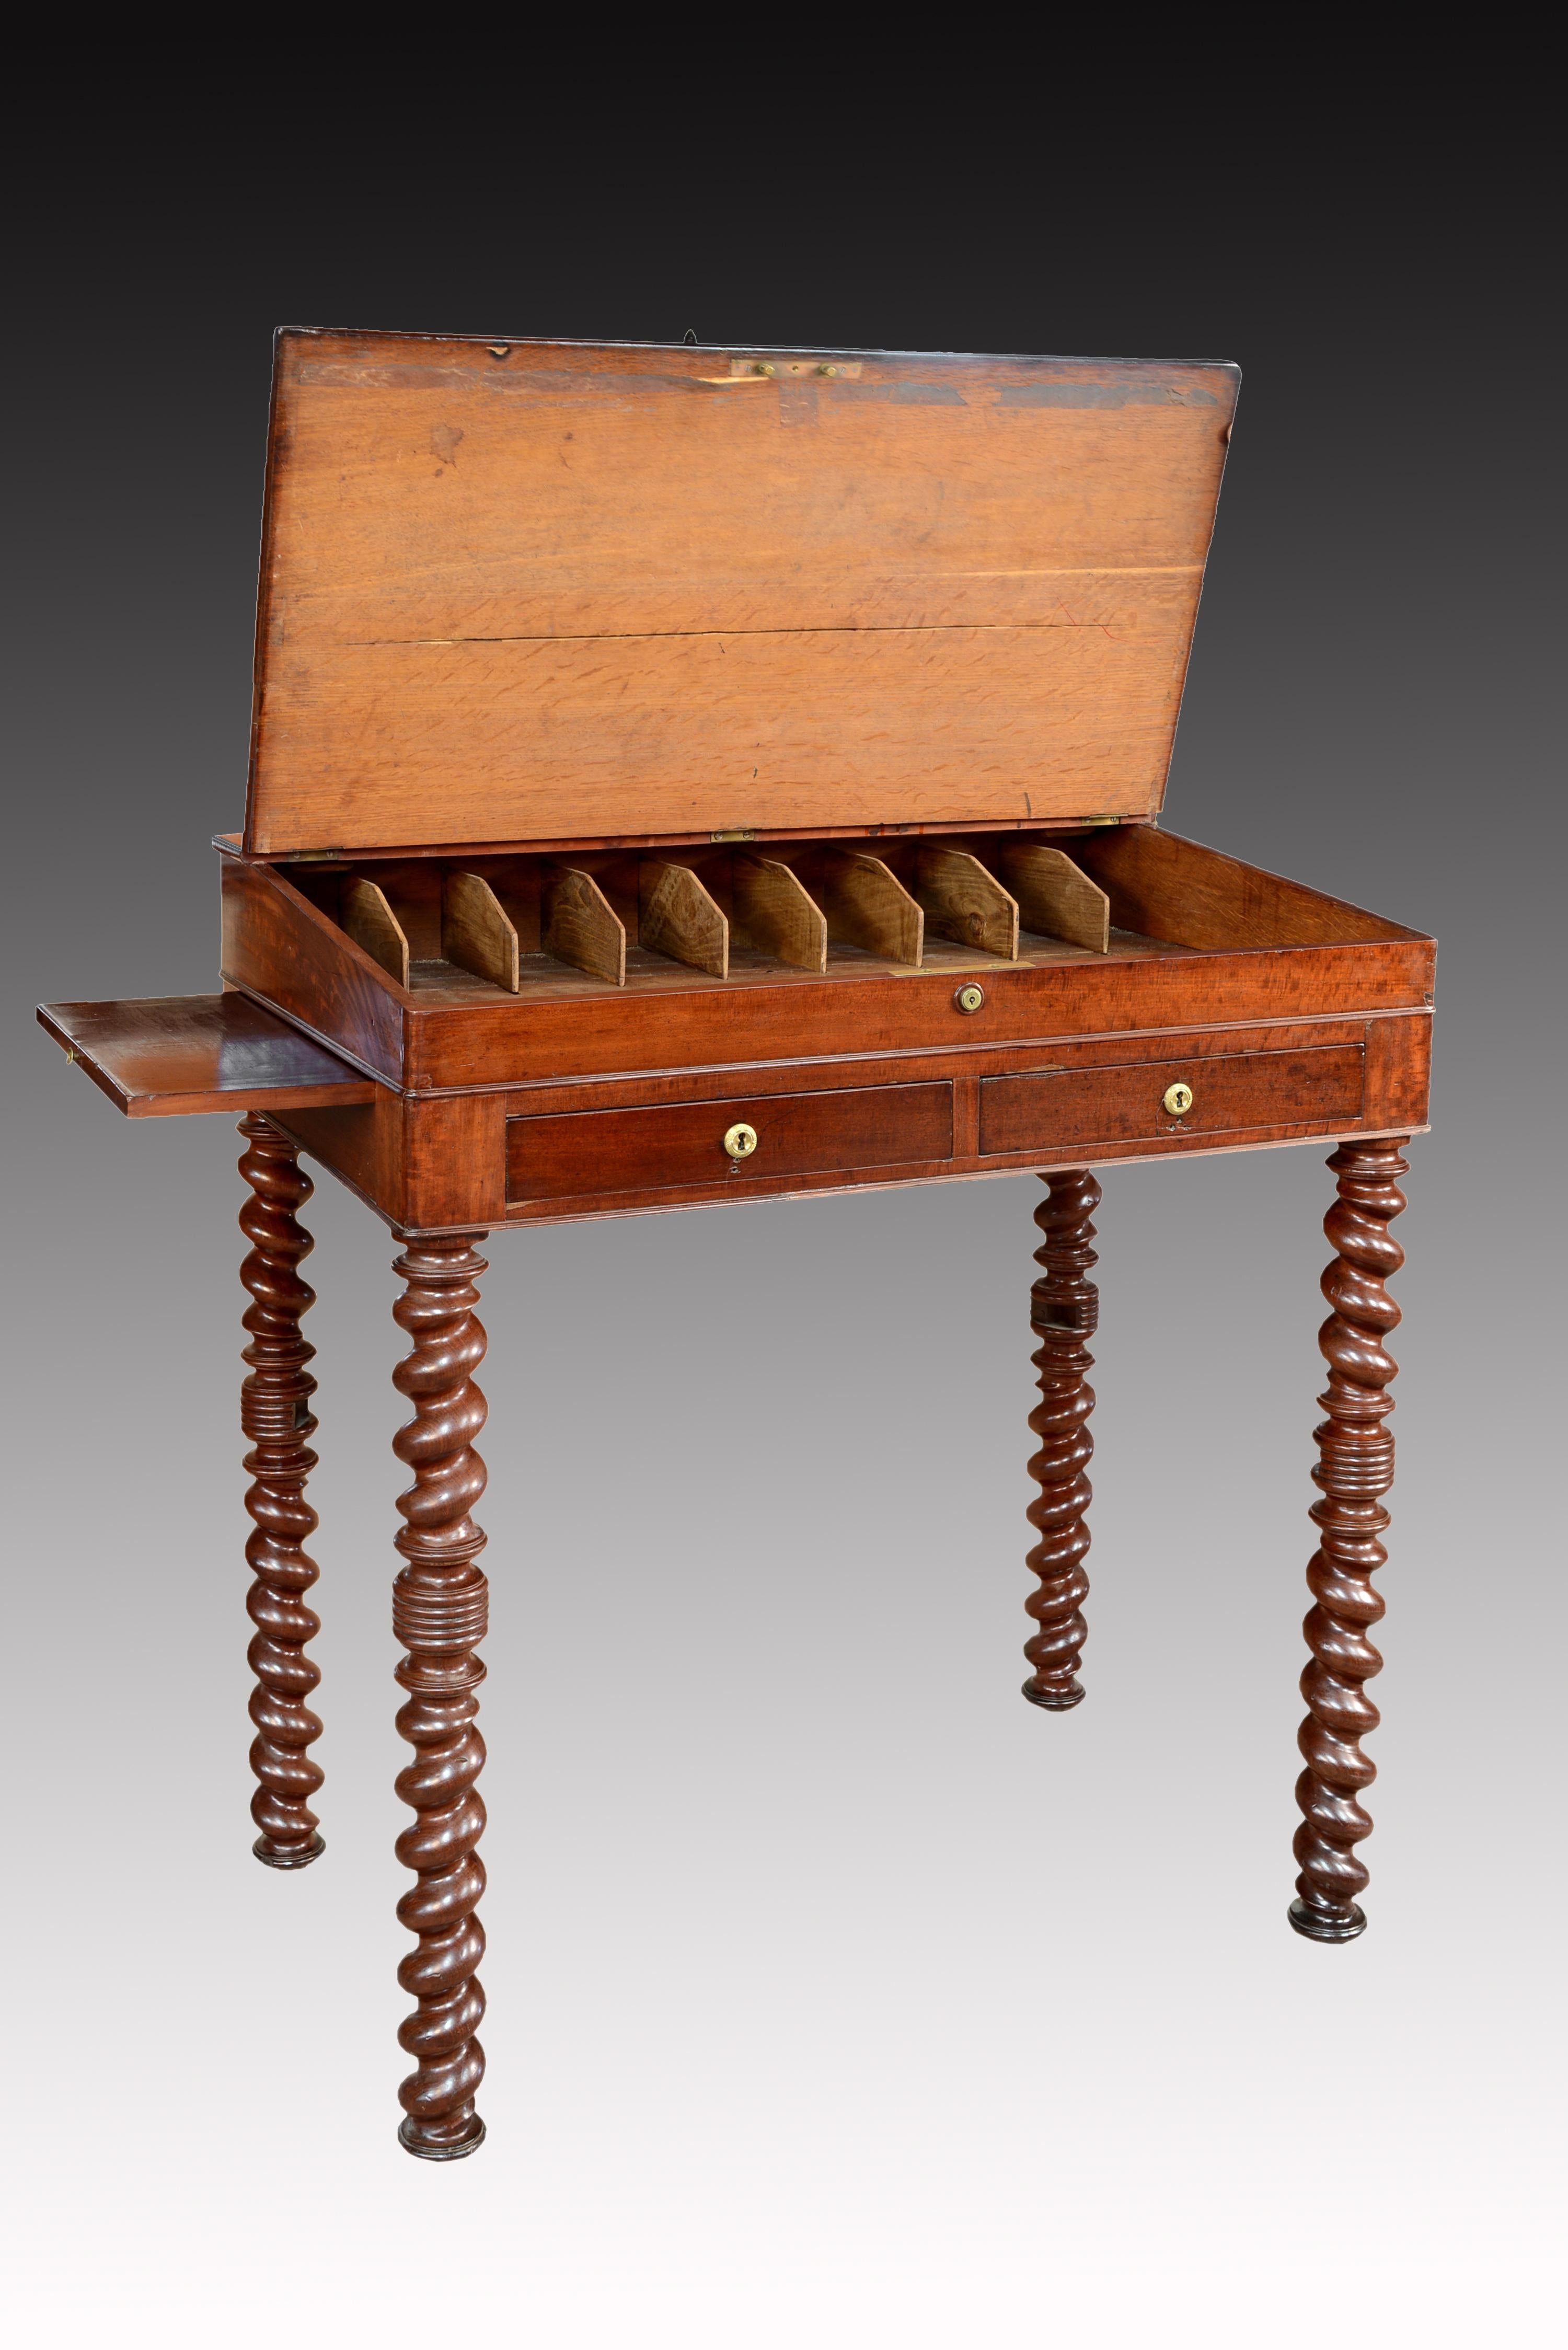 Mahogany wood “architect desk” table, France, 19th century.
On four solomonic legs with a central knot stands the table, which has two drawers on the skirt, some boards on the sides and a sloping top. Inside, a large empty space is located under